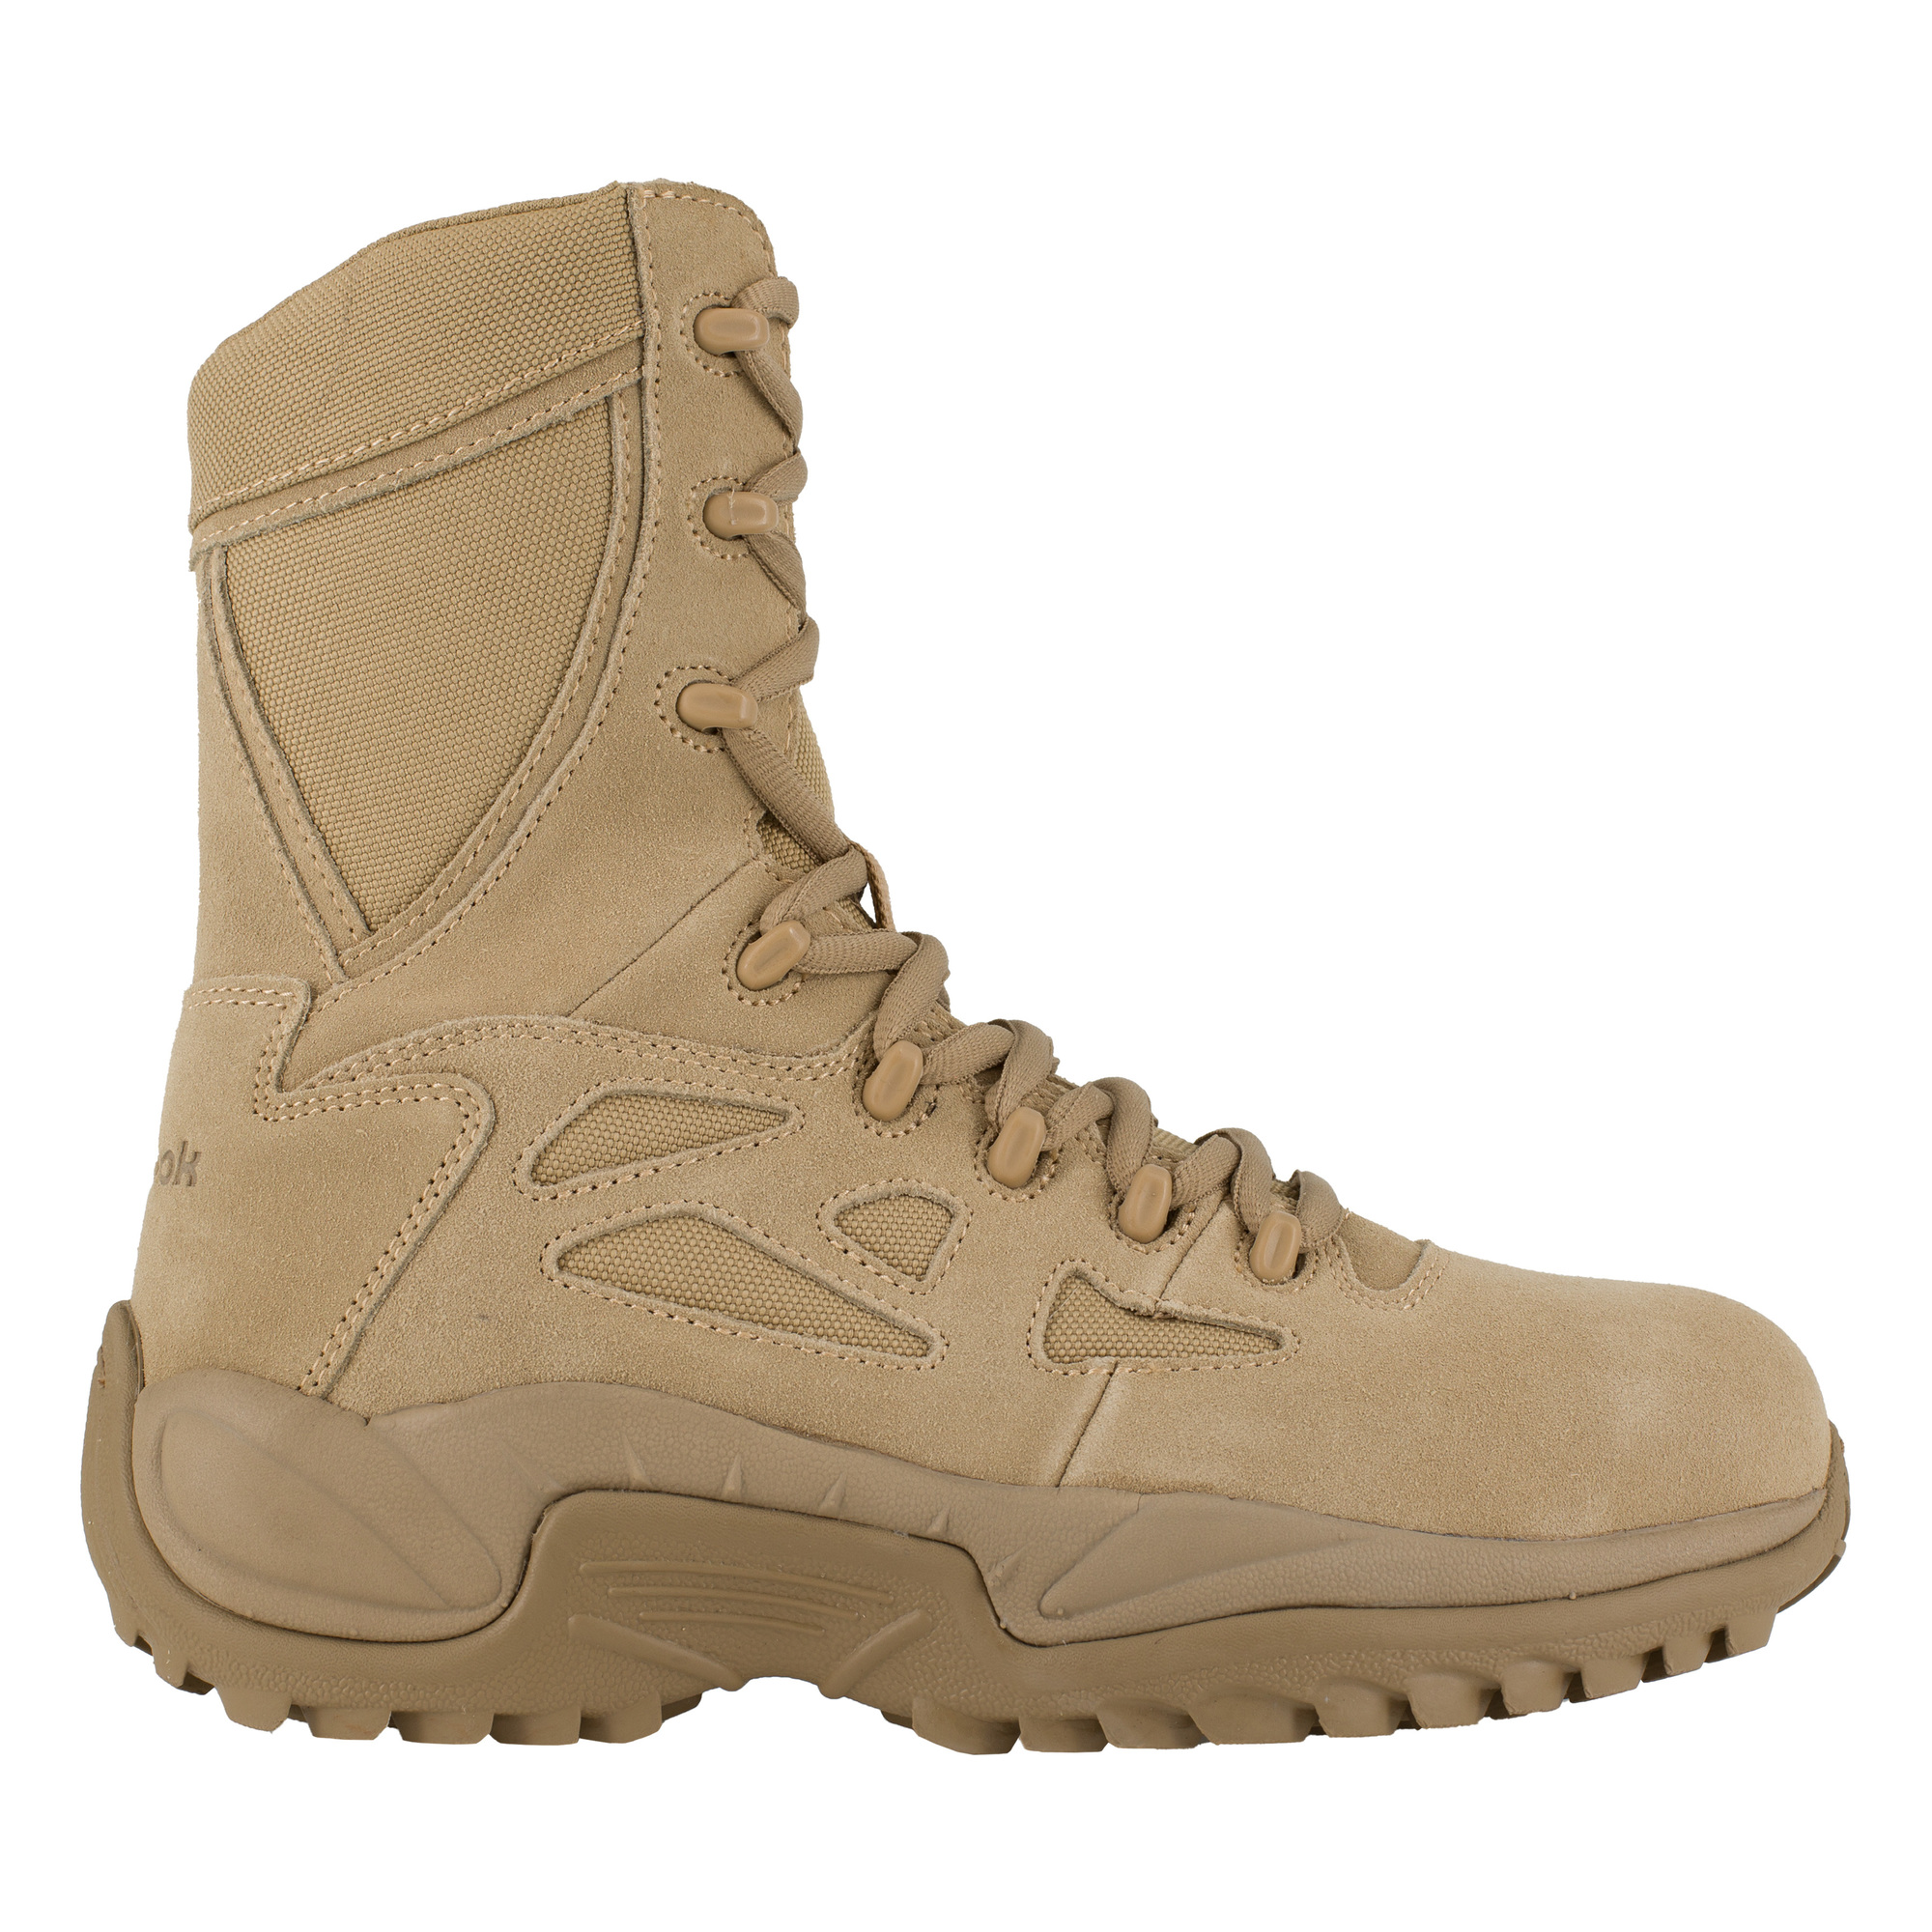 Reebok, 8Inch Stealth Tactical Boot with Side Zipper, Size 7, Width Wide, Color Desert Tan, Model RB894 -  RB894-W-07.0